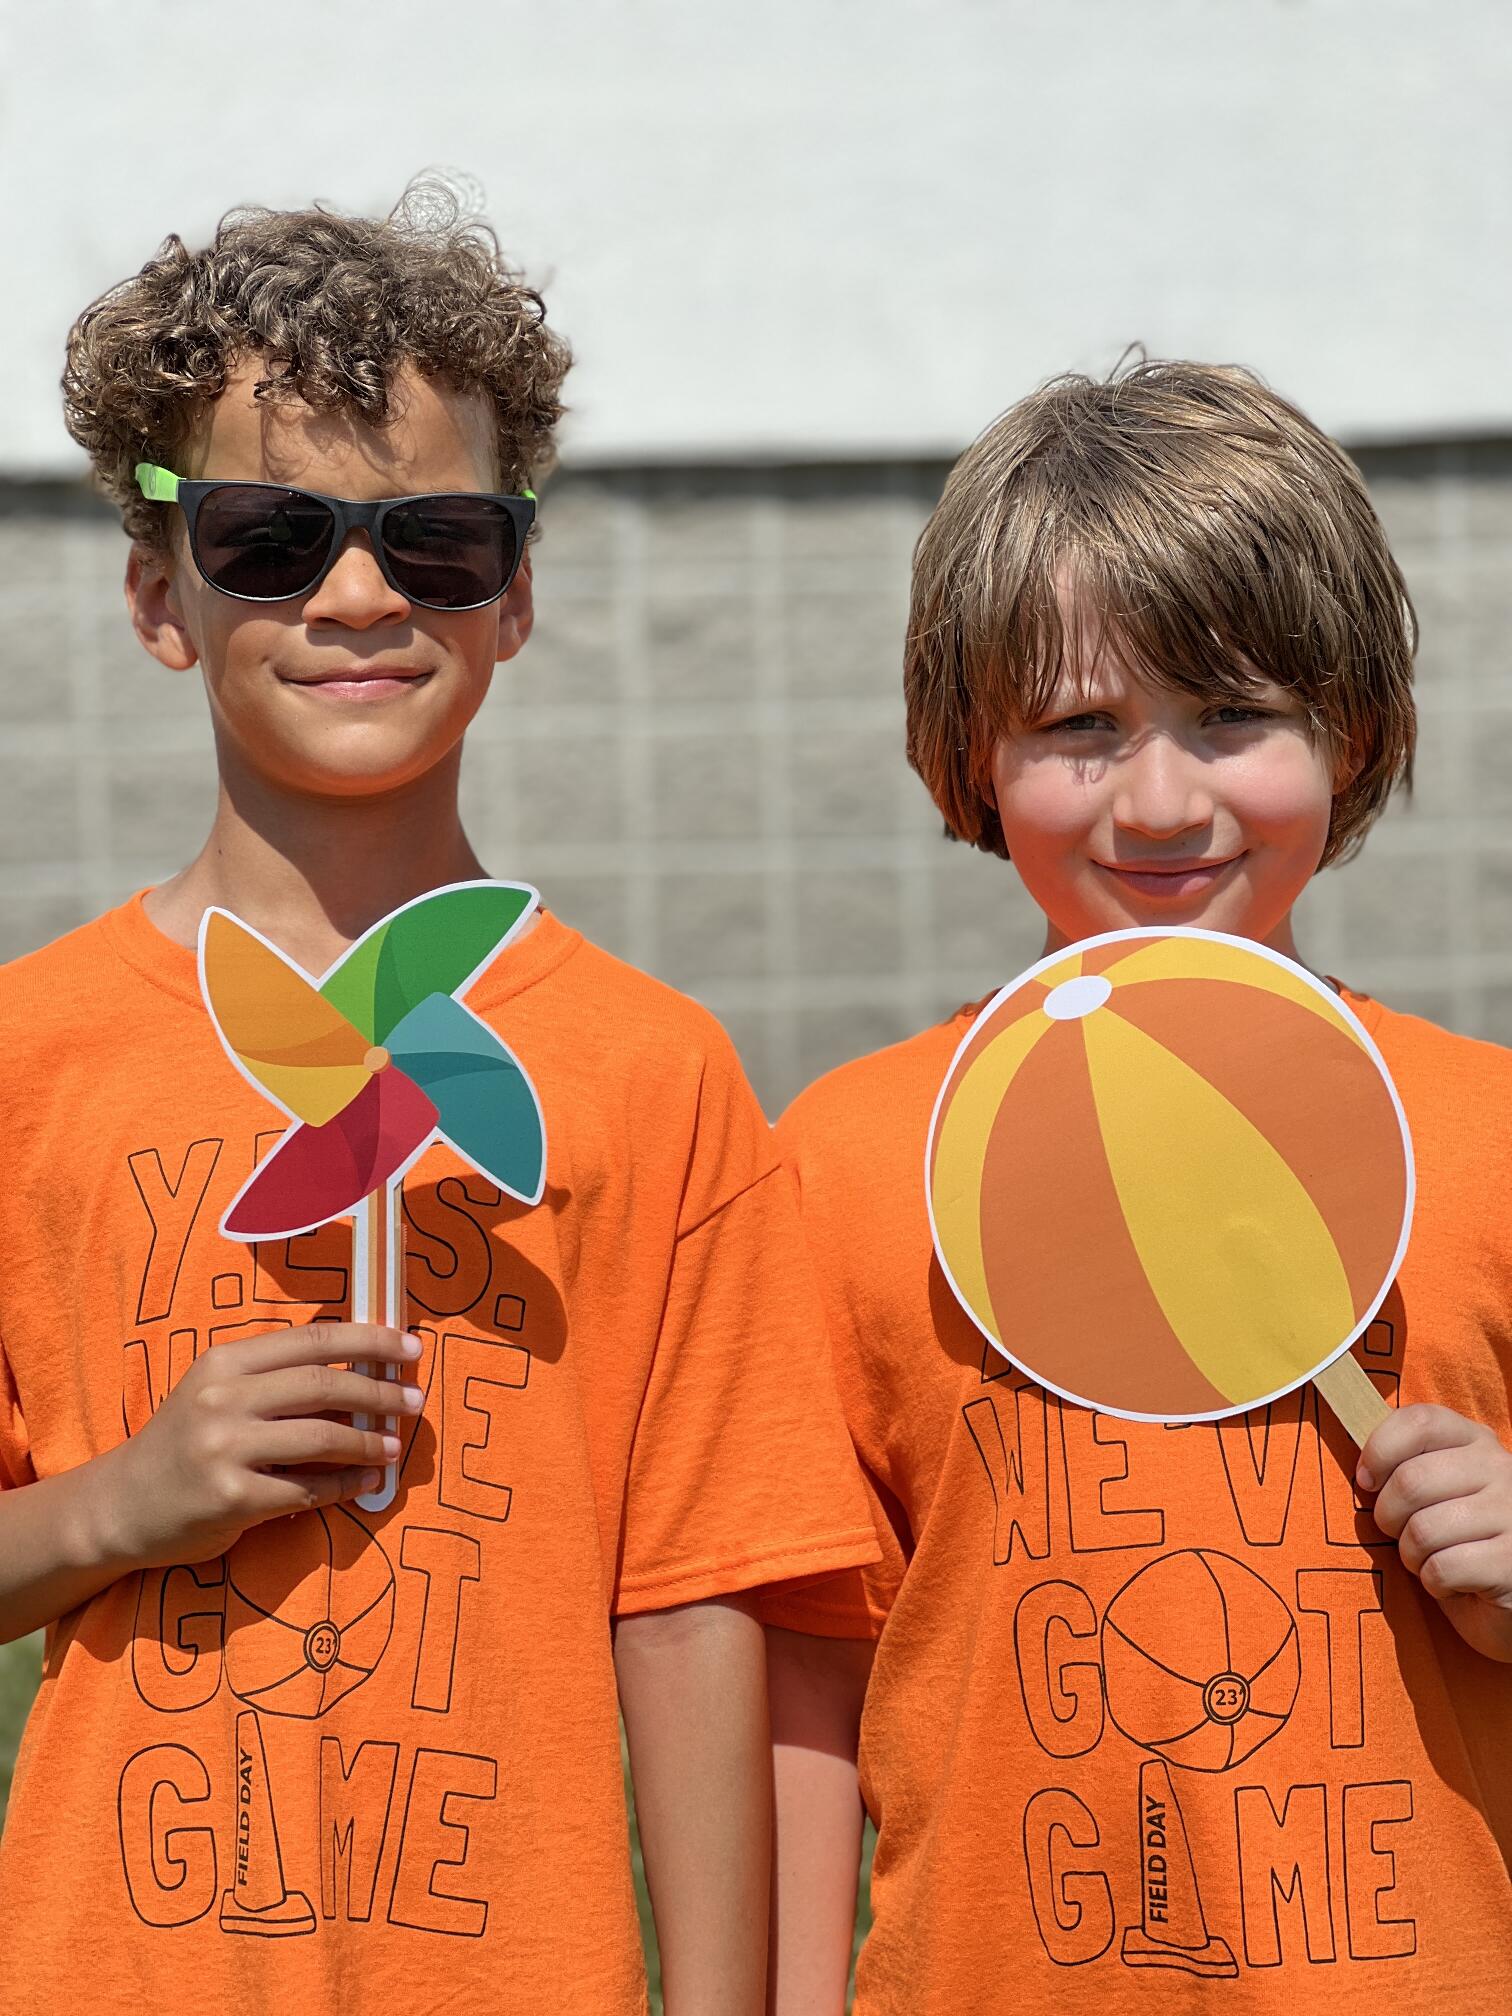 students at fun run holding game objects